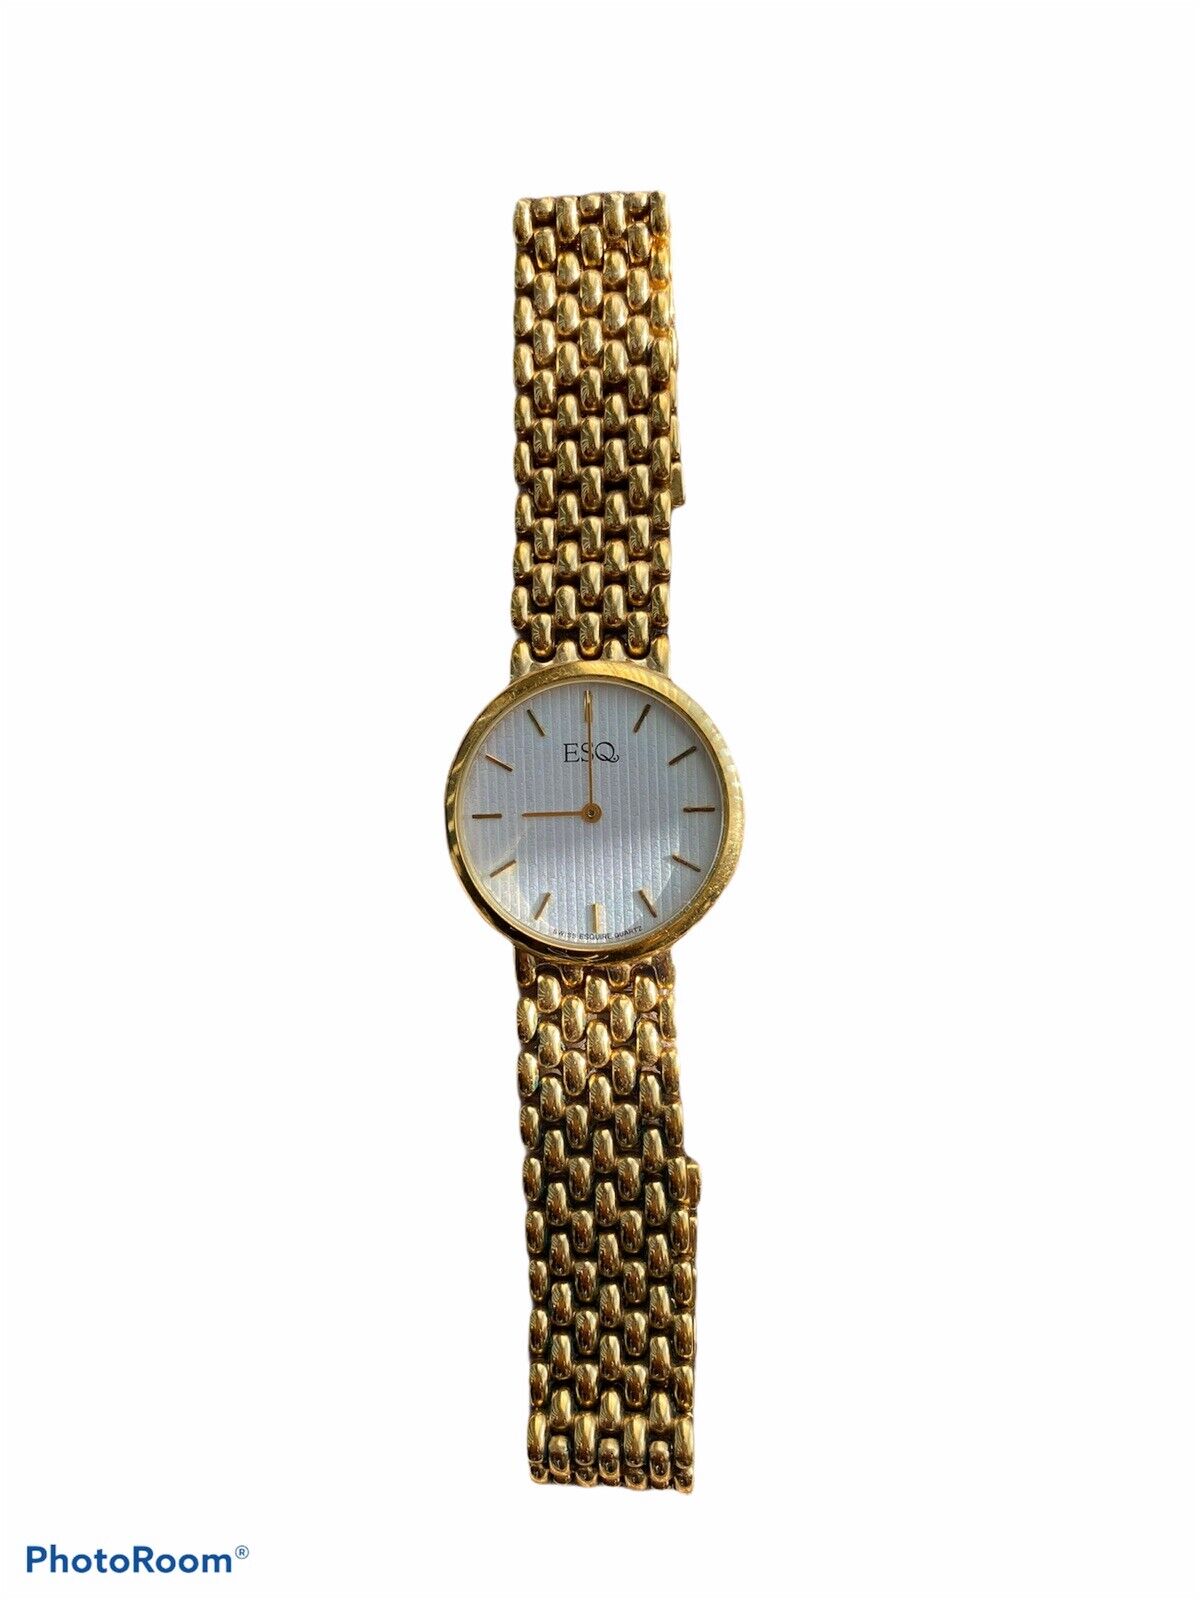 ESQUIRE MENS GOLD WATCH